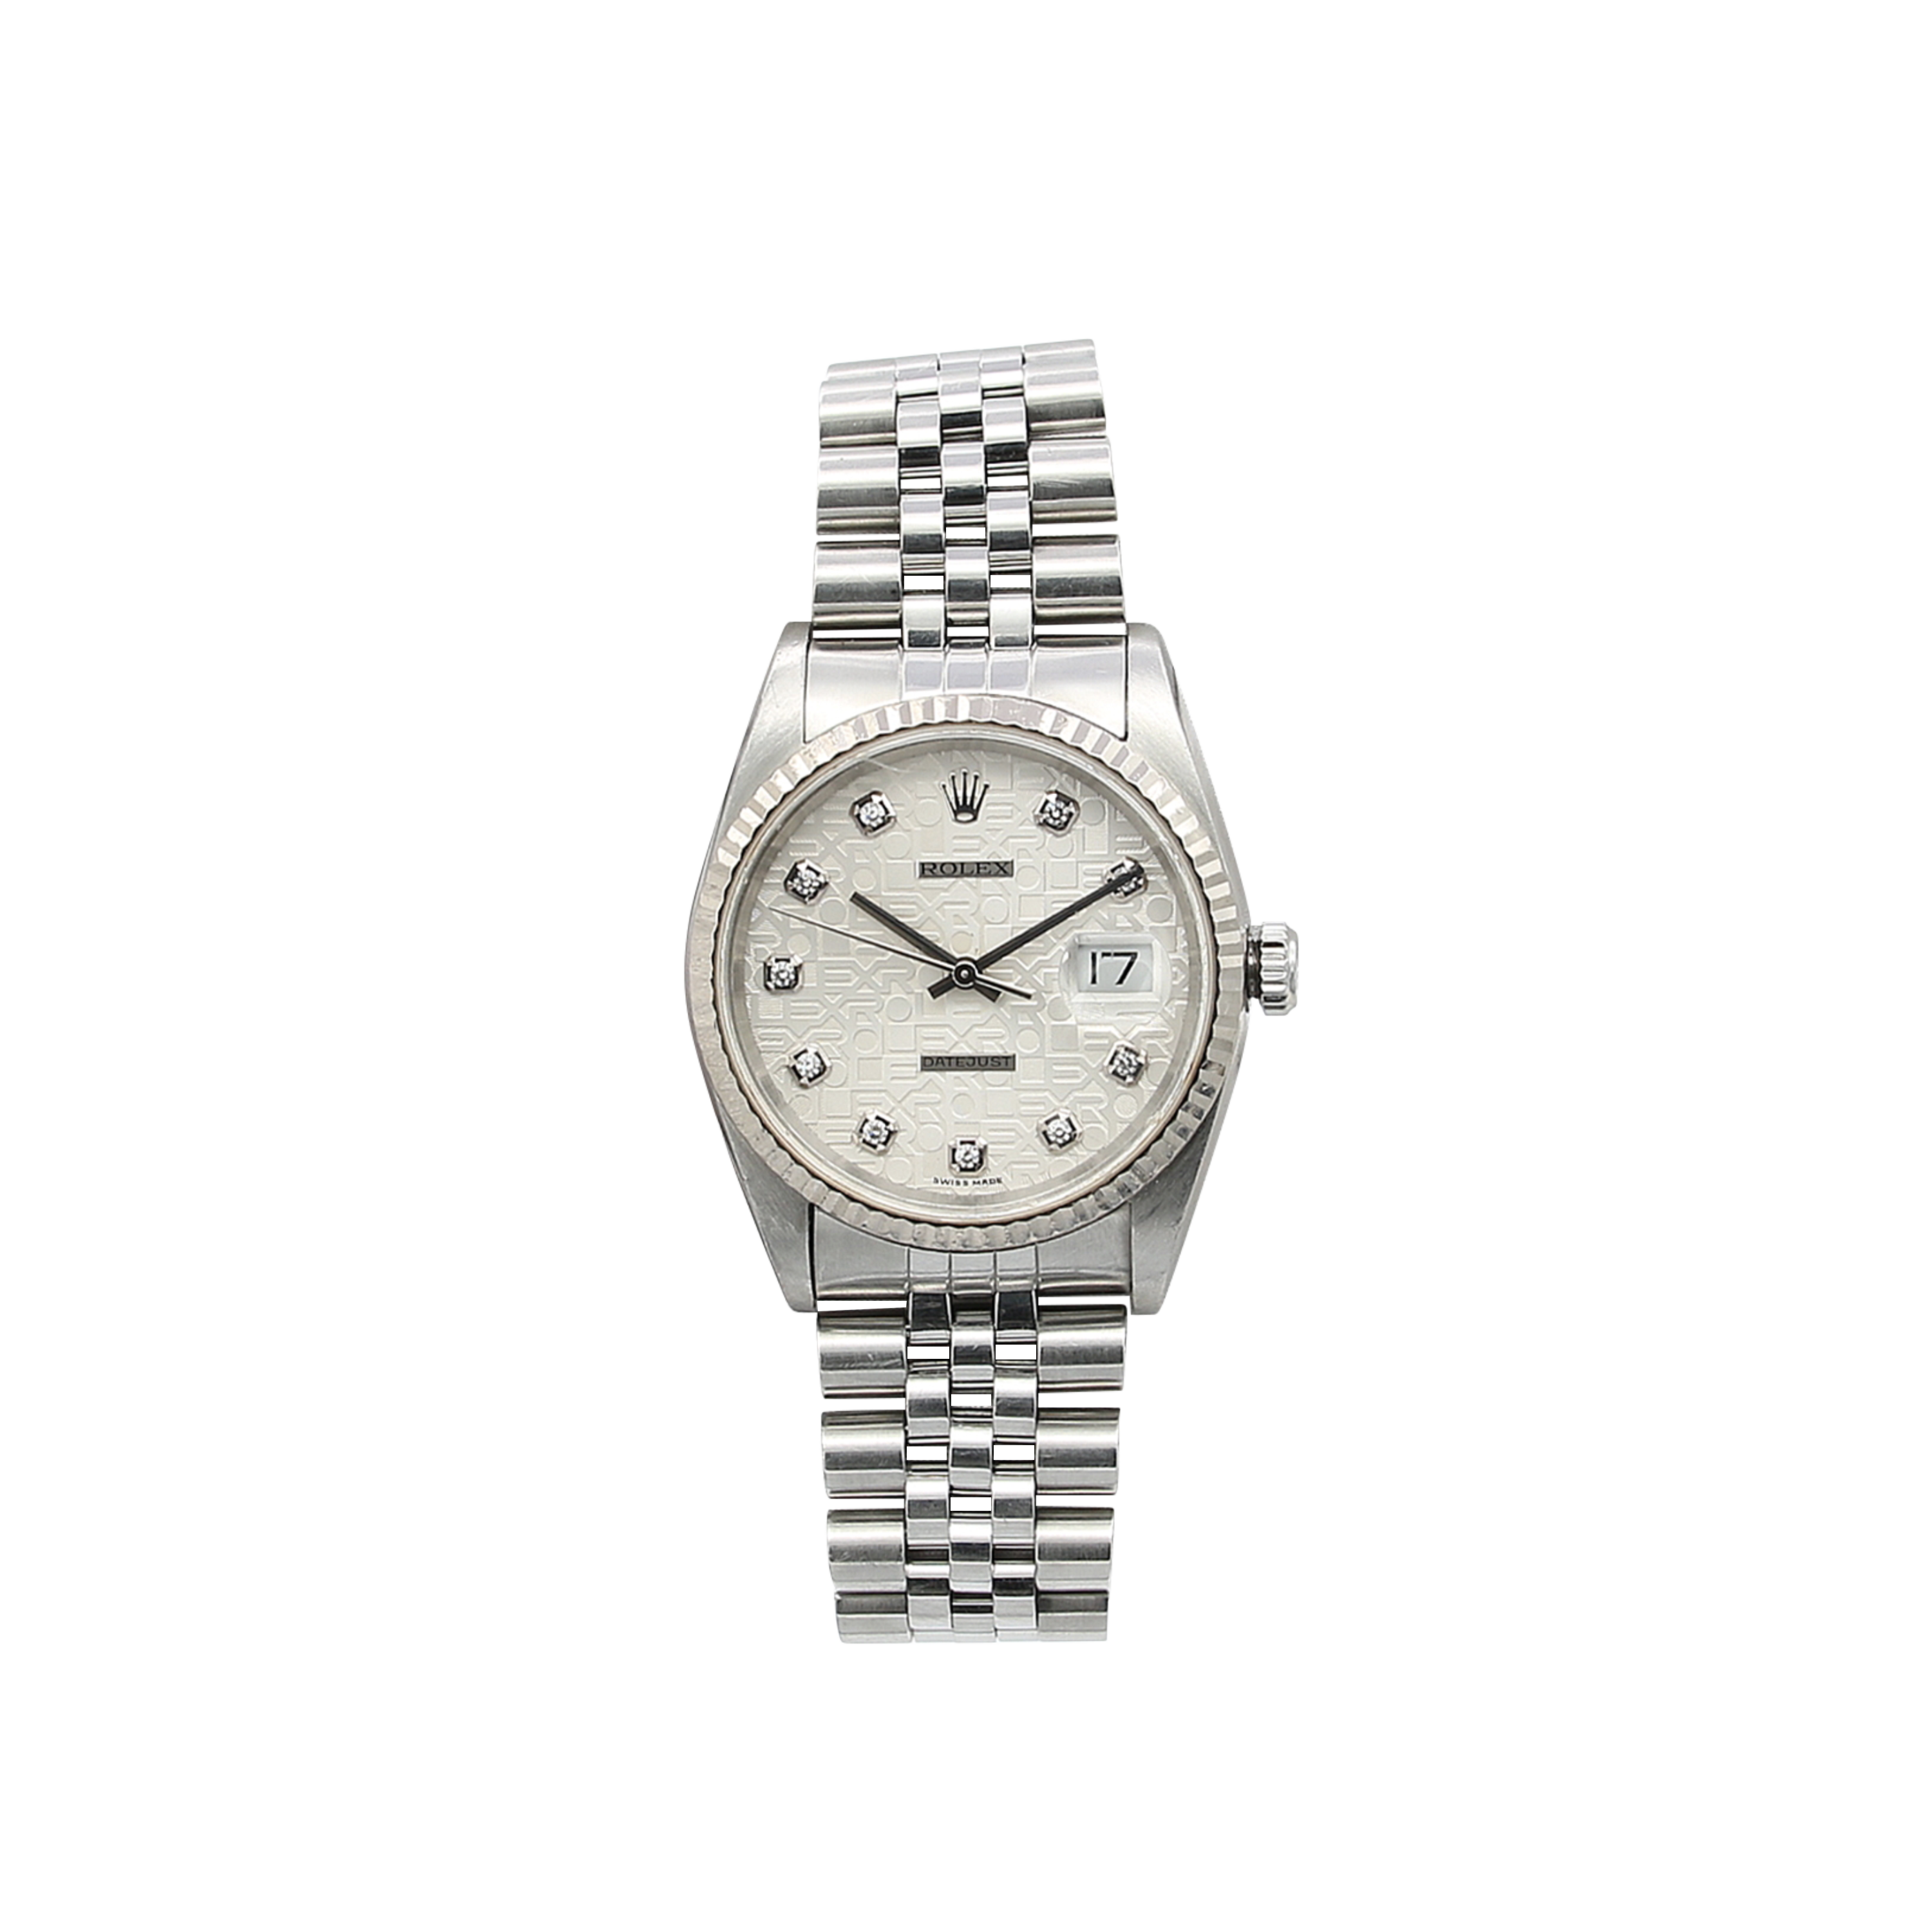 Rolex Datejust 36 ref. 16234 Computer Dial with Diamonds